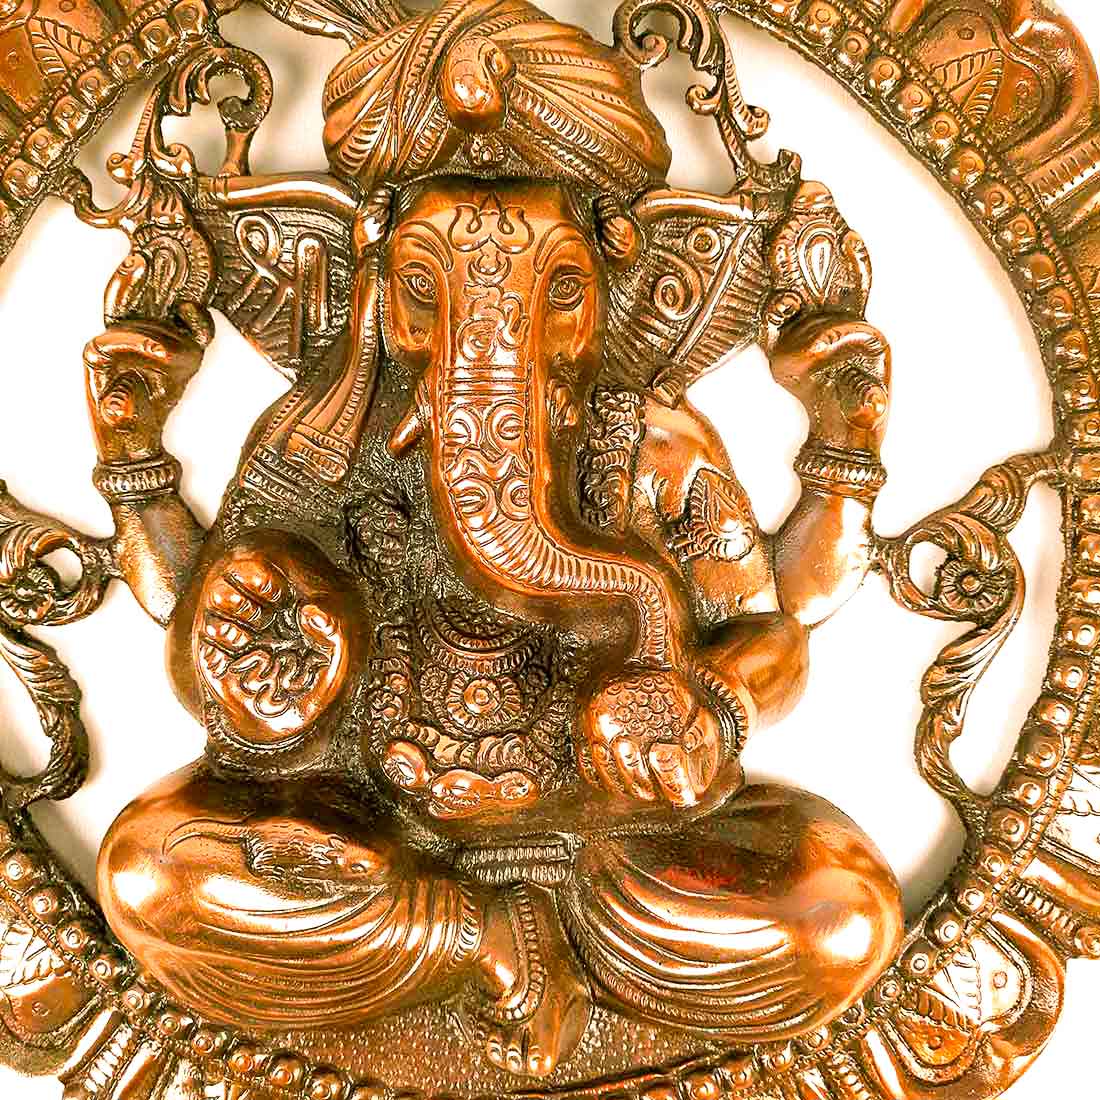 Ganesh Wall hanging -  For for Living Room & Gifts - 18 Inch - ApkaMart